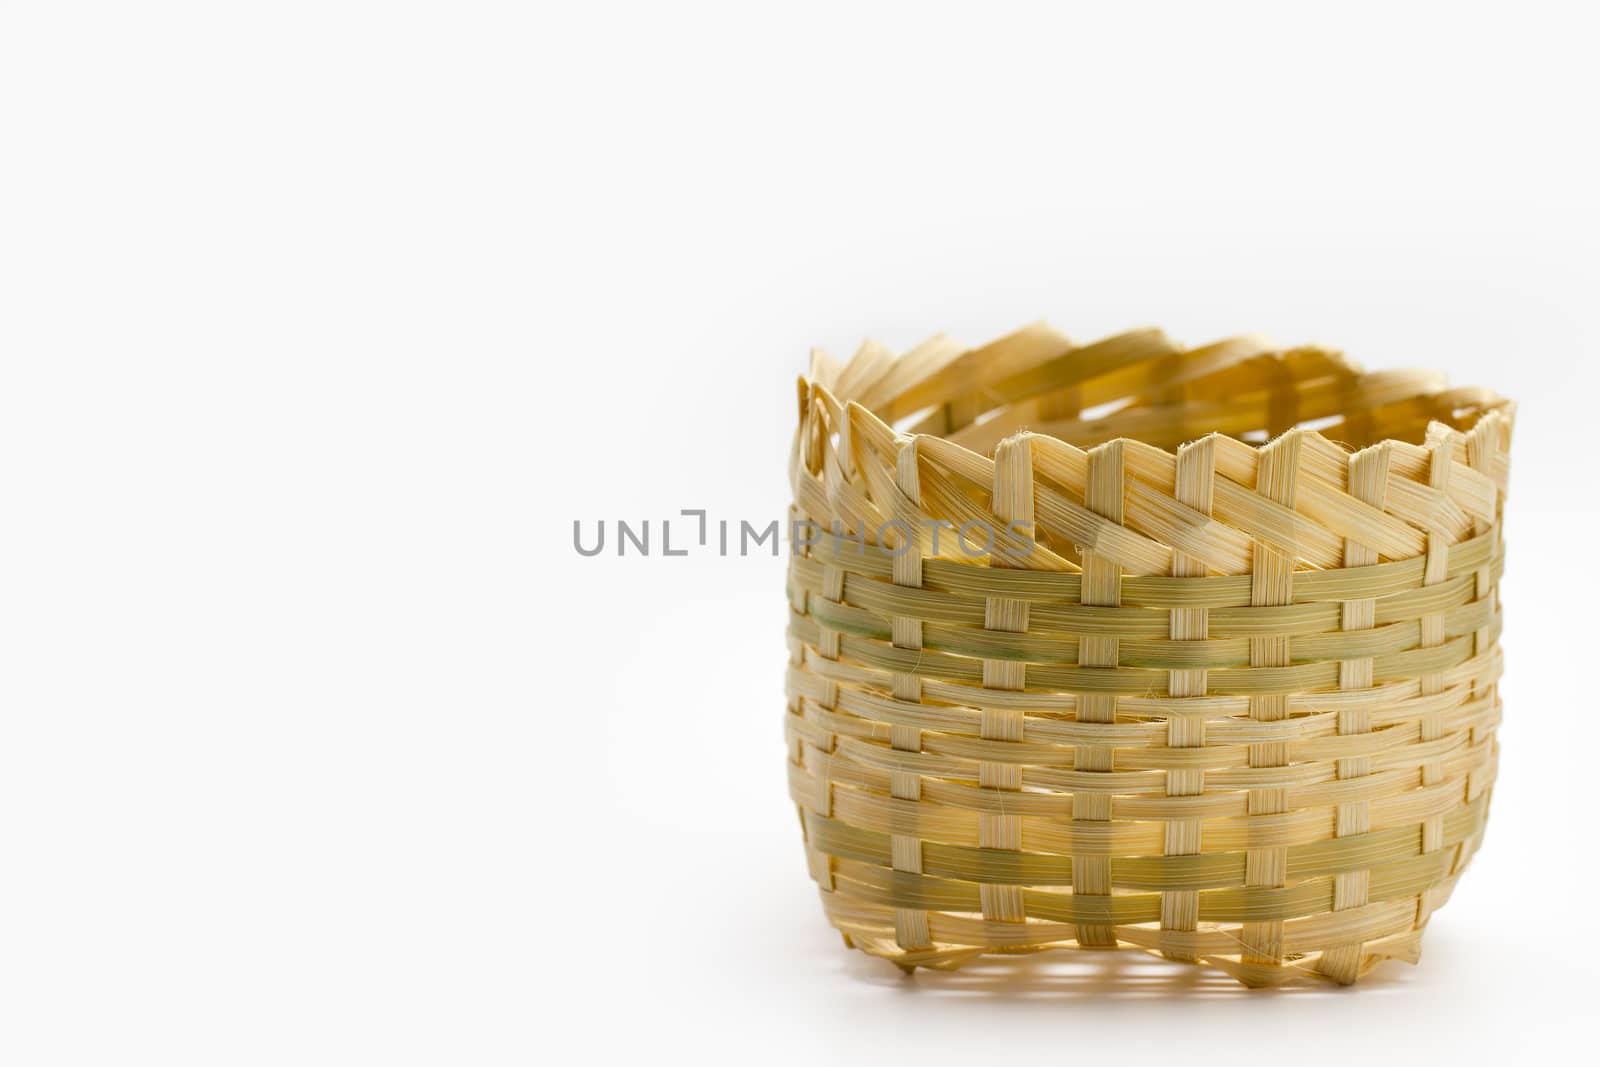 The small basket is made from bamboo, laid on white background.